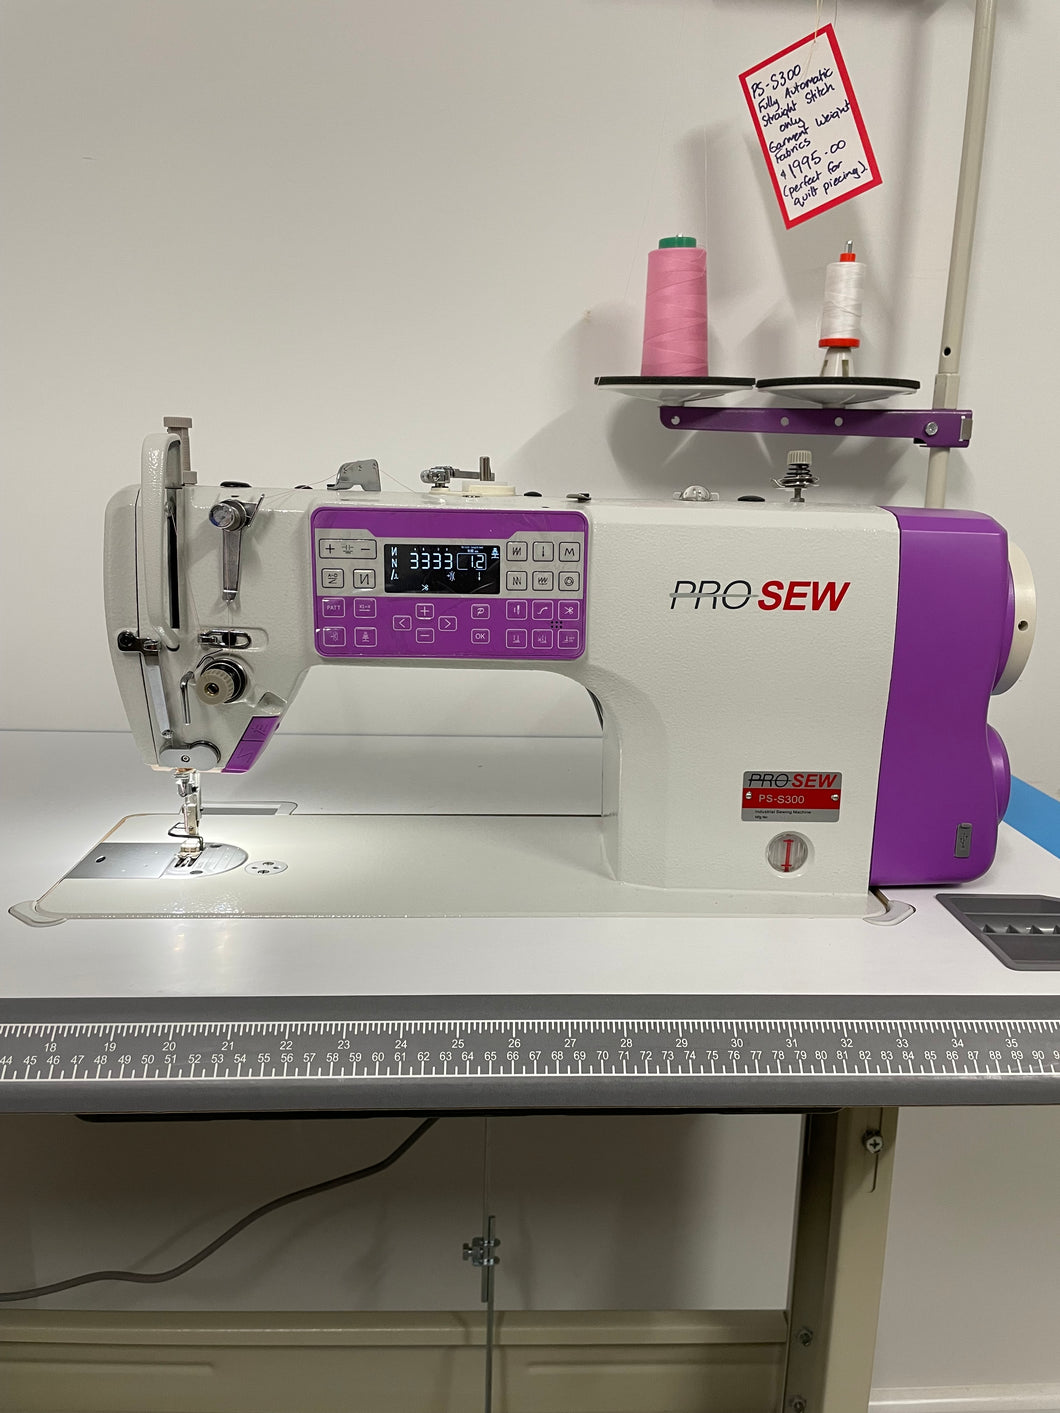 Prosew PS-S300 Industrial Sewing Machine - Please email for availability